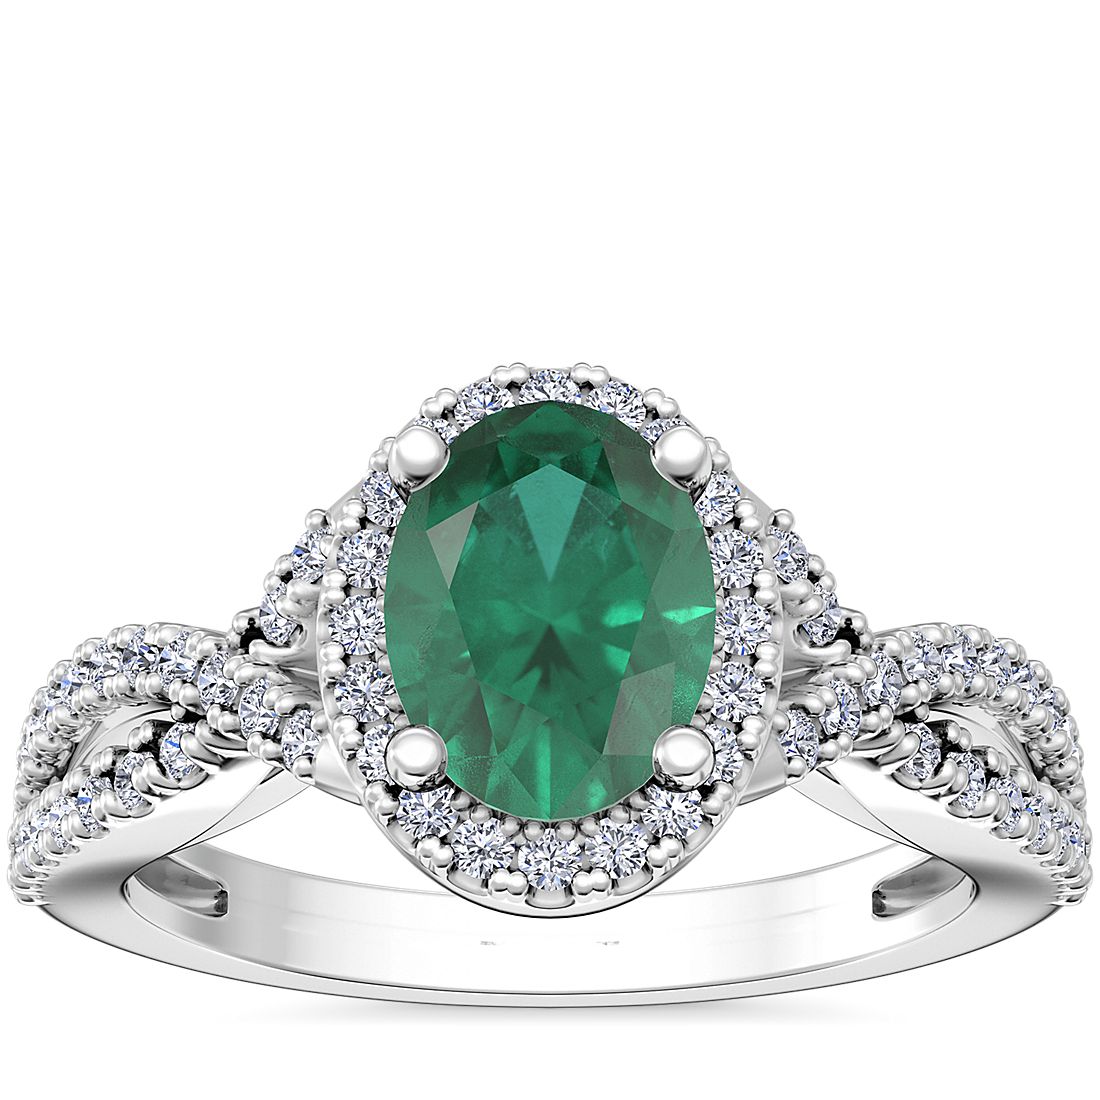 Twist Halo Diamond Engagement Ring with Oval Emerald in 14k White Gold (8x6mm)